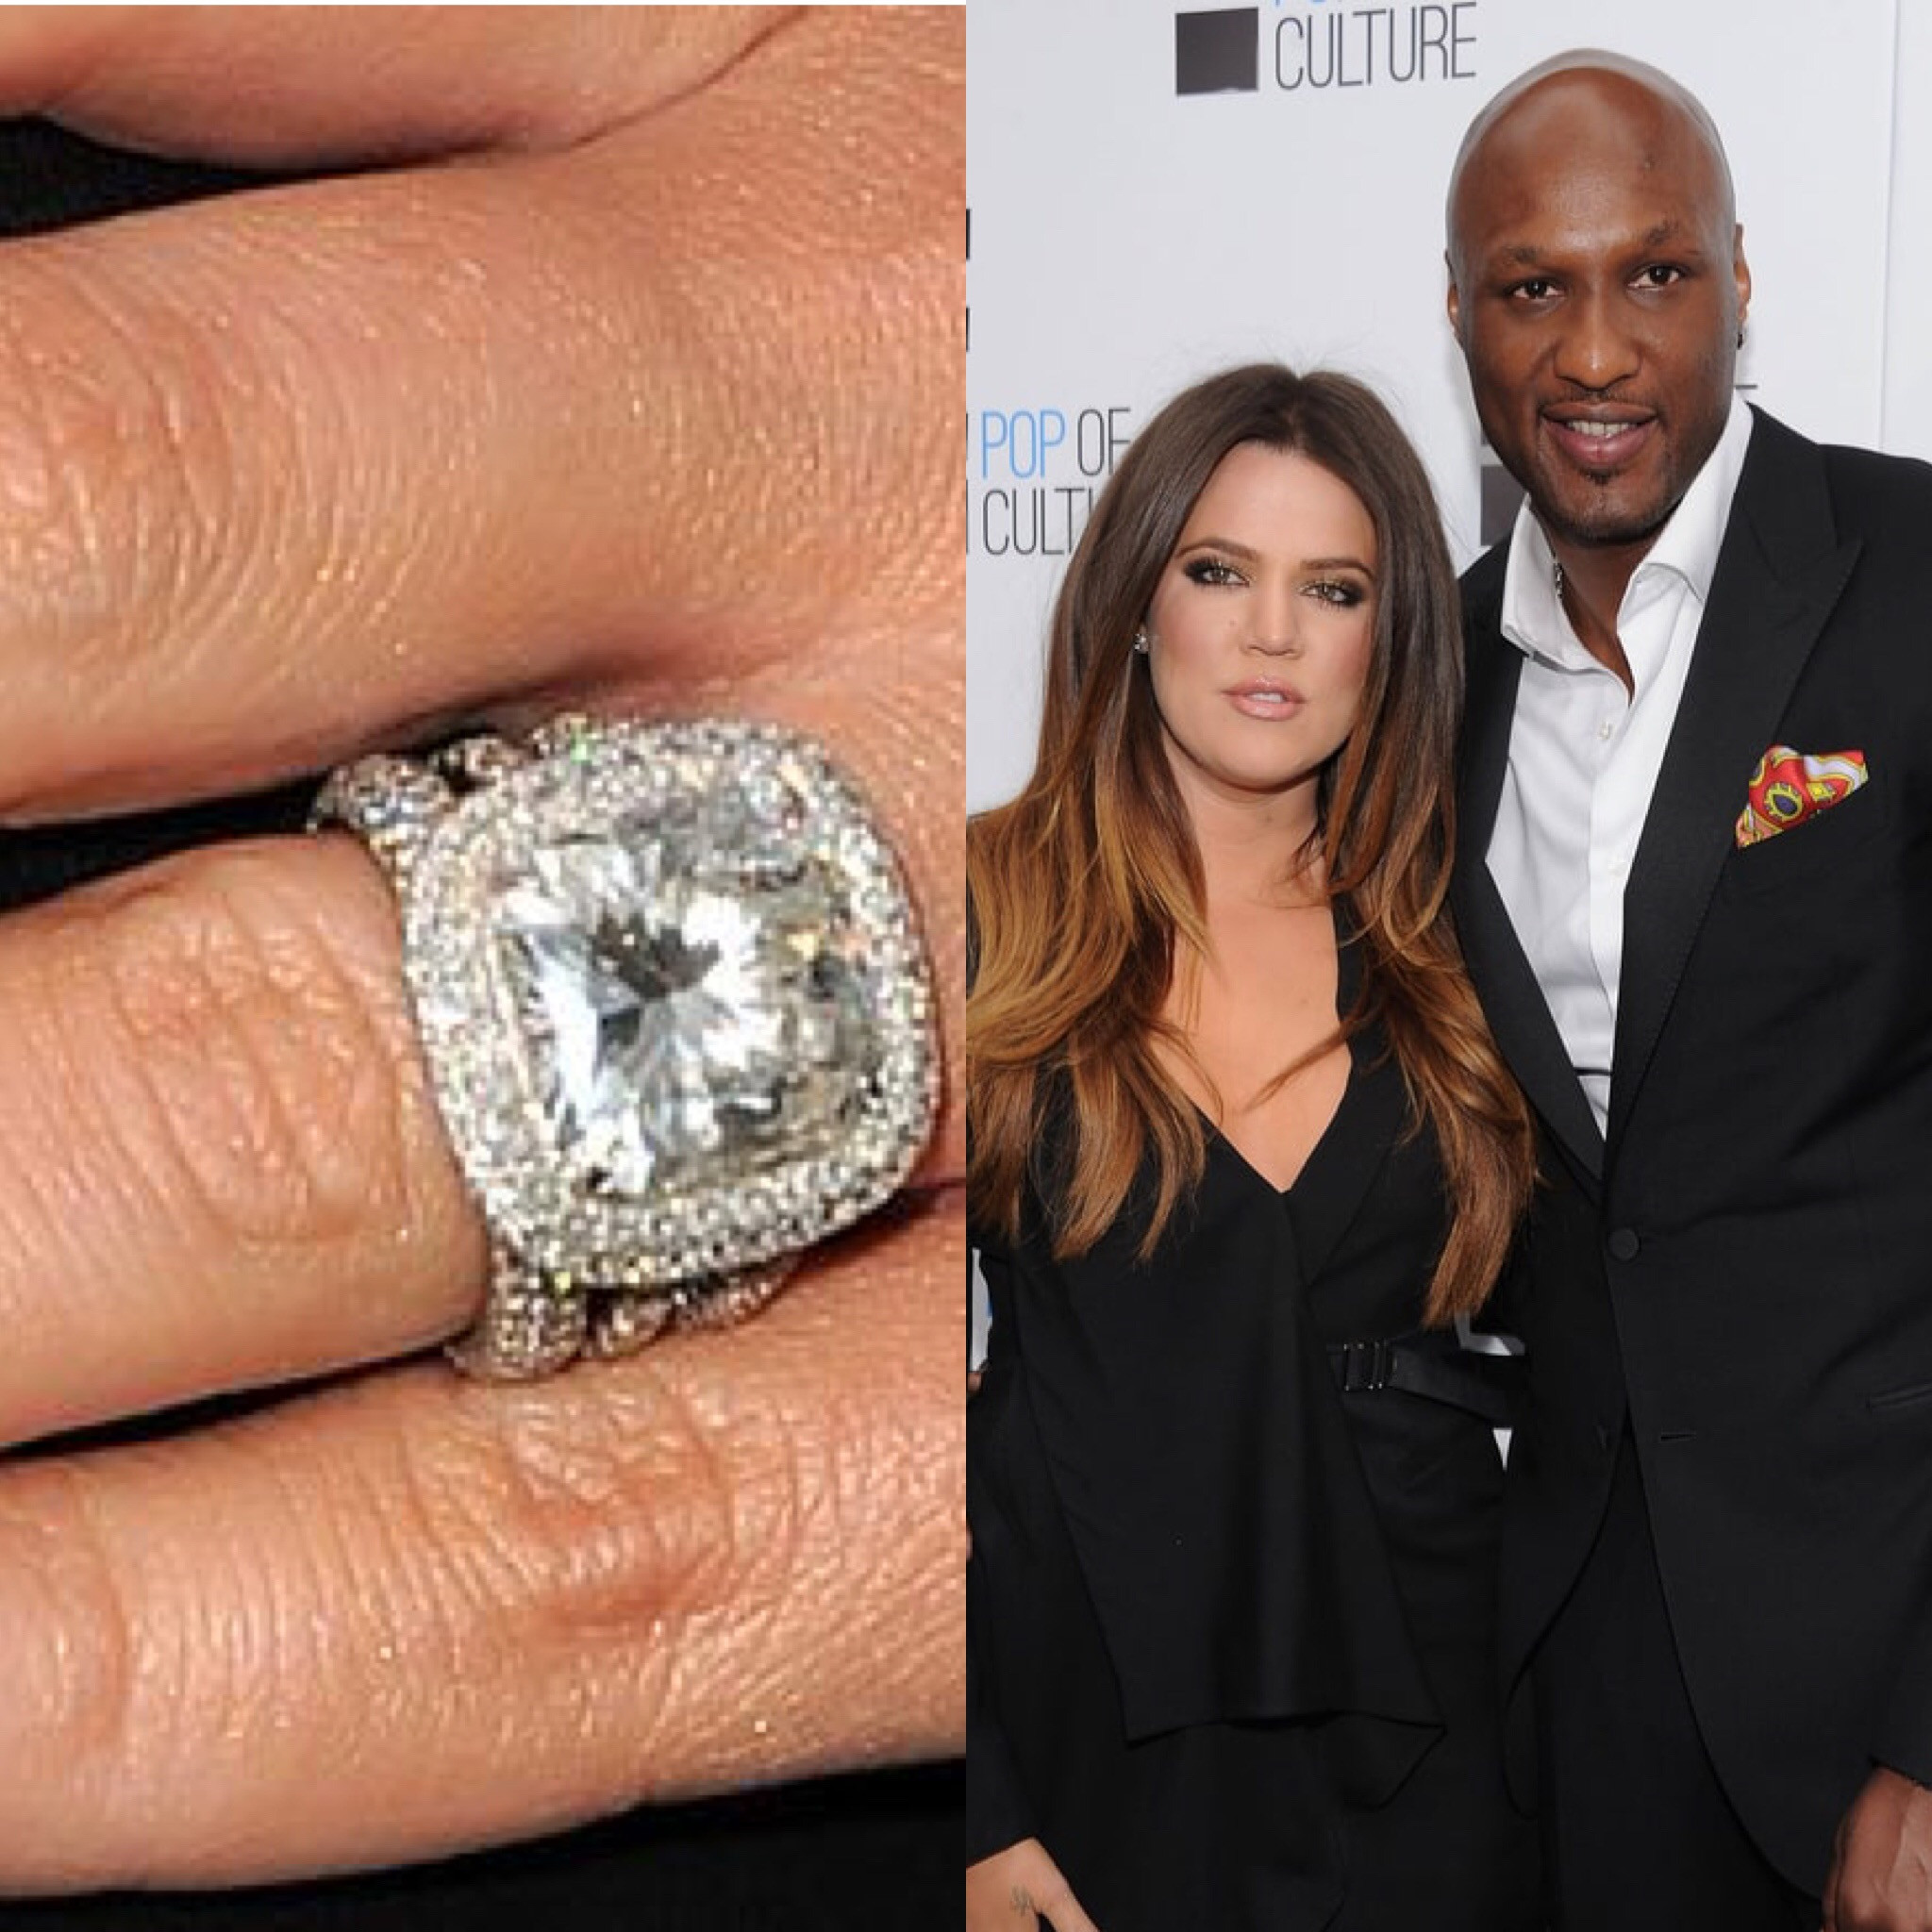 Kobe Bryant Wedding Ring
 These 8 Celebrity Engagement Rings Will Have You Green